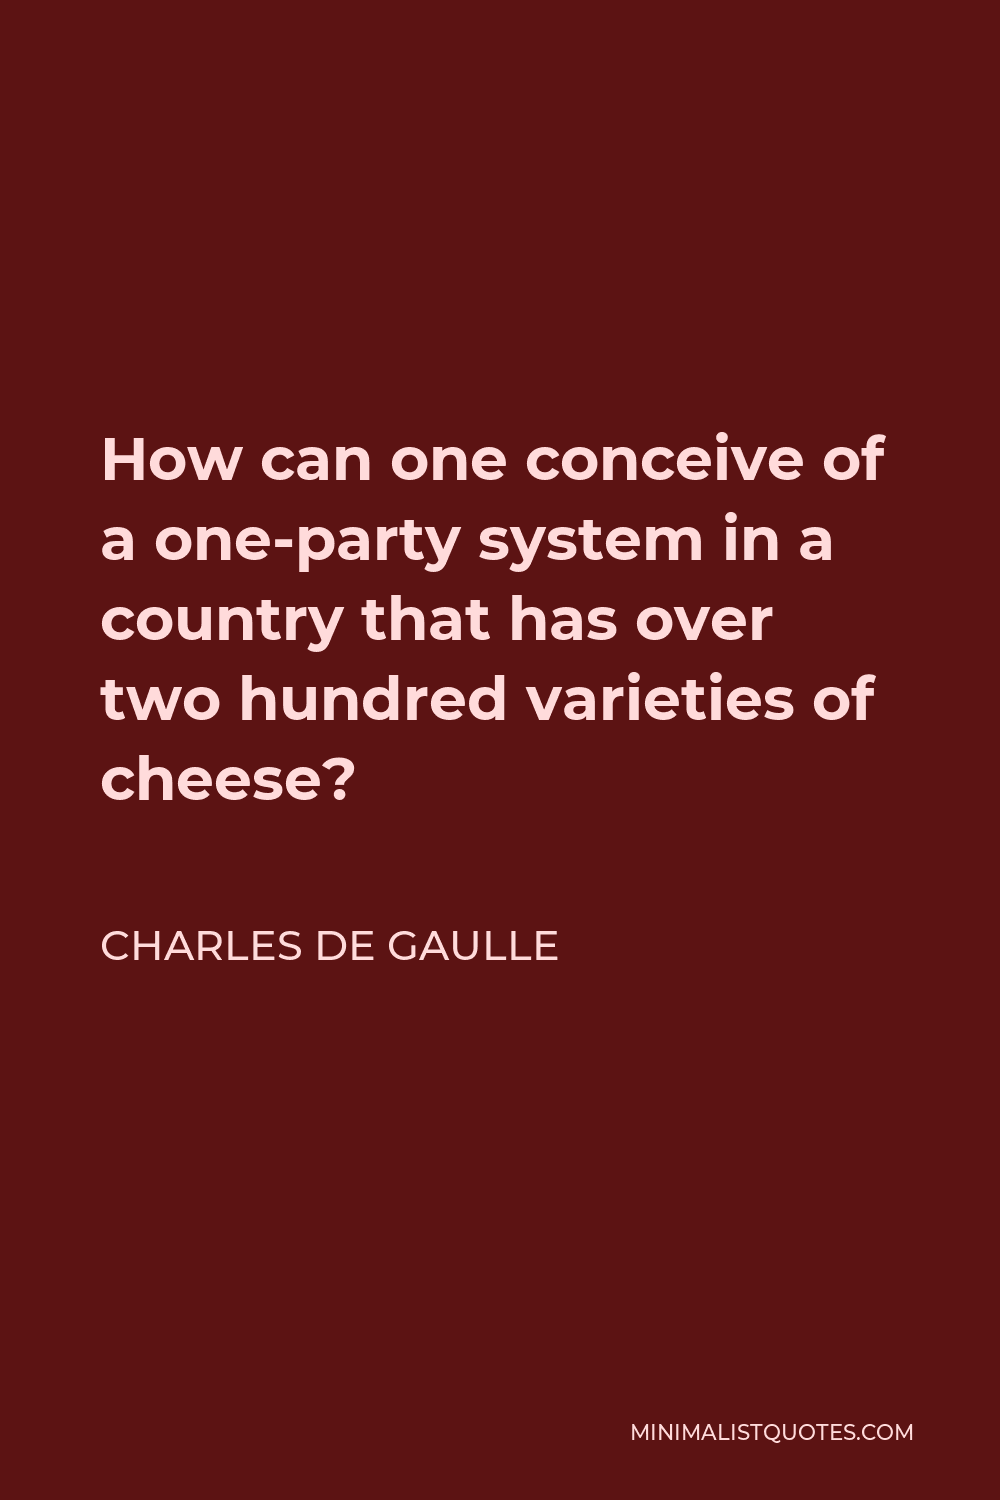 Charles de Gaulle Quote - How can one conceive of a one-party system in a country that has over two hundred varieties of cheese?